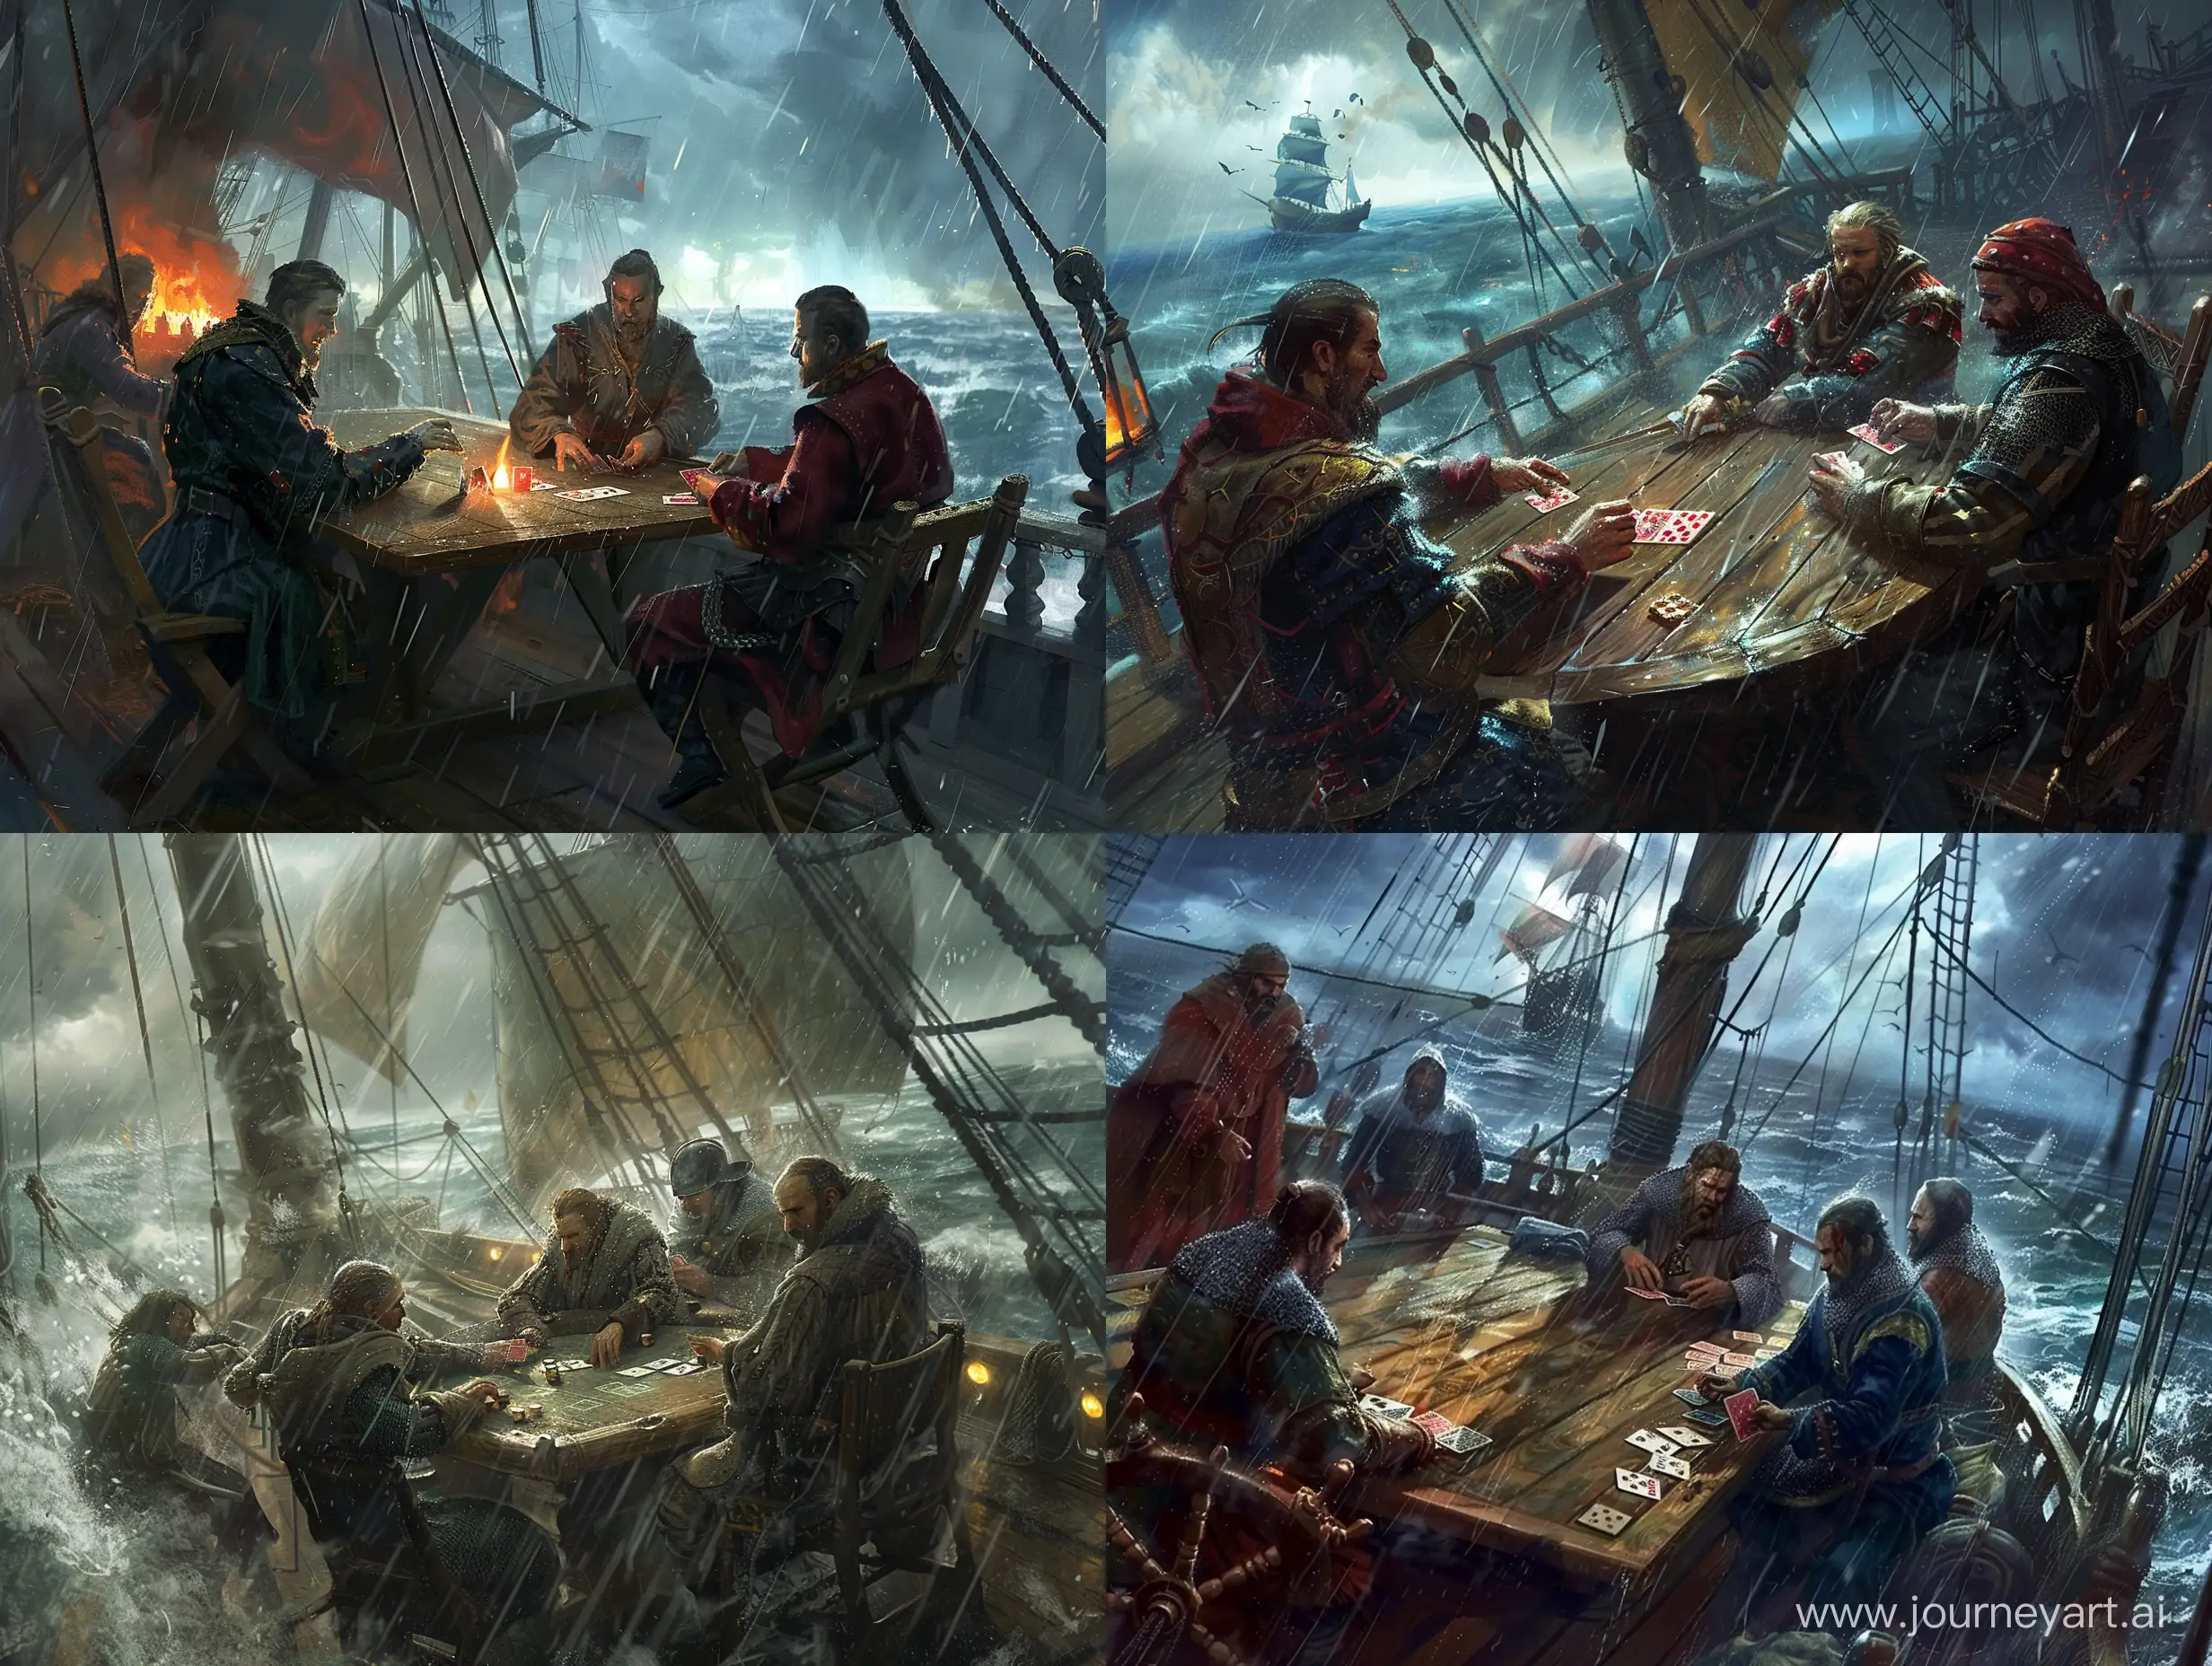 Men play cards on the deck of a medieval ship in a storm